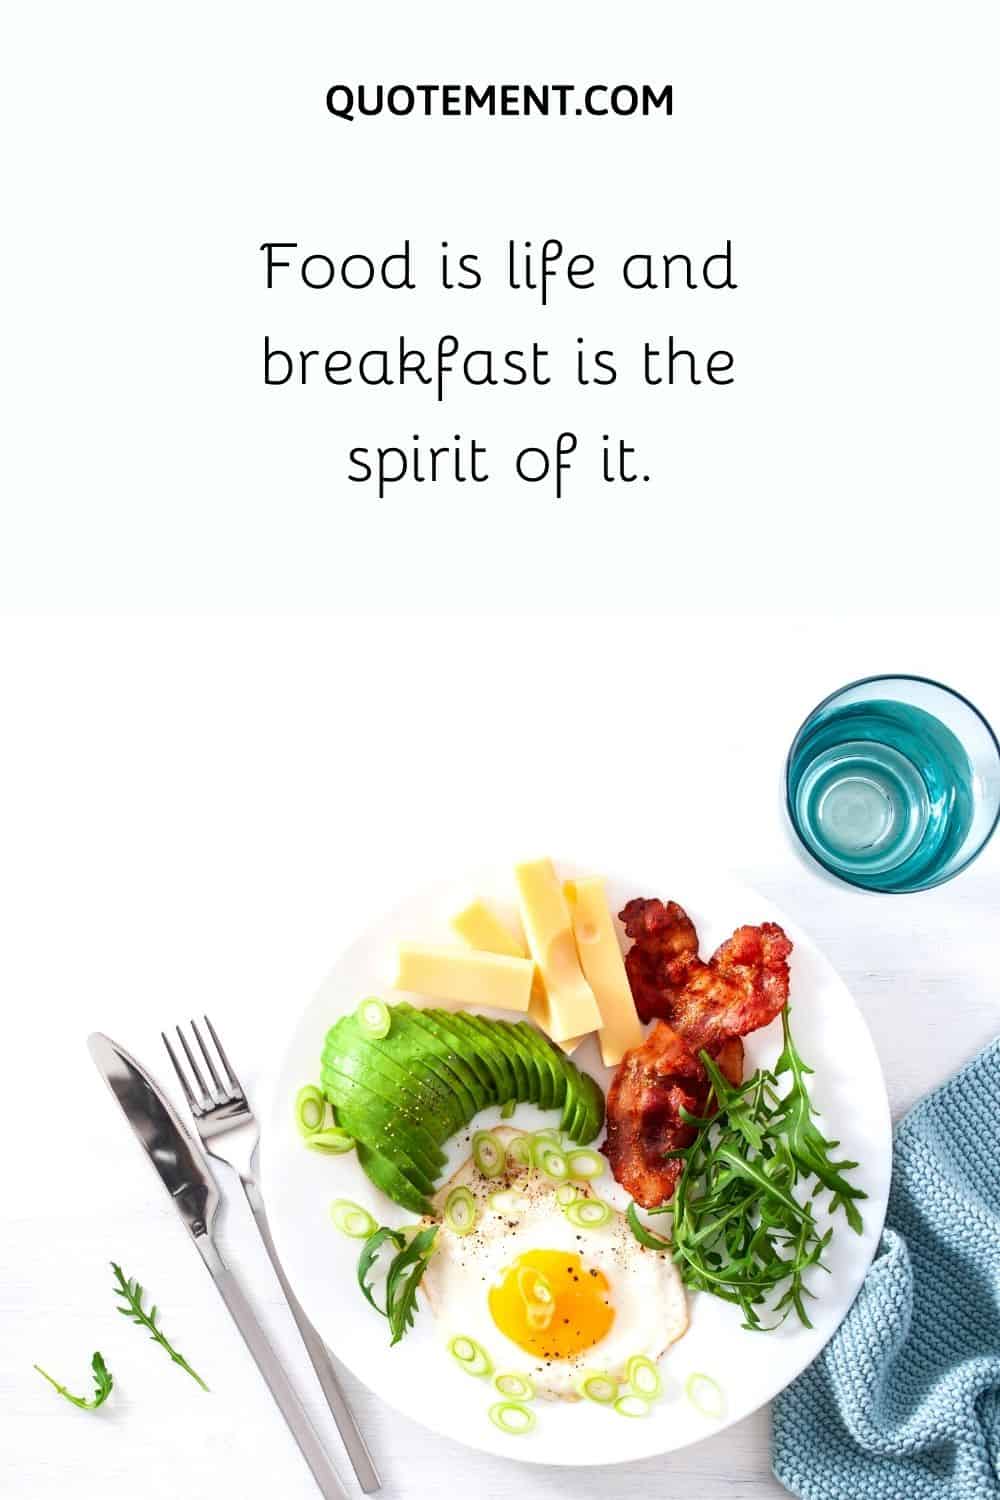 Food is life and breakfast is the spirit of it.